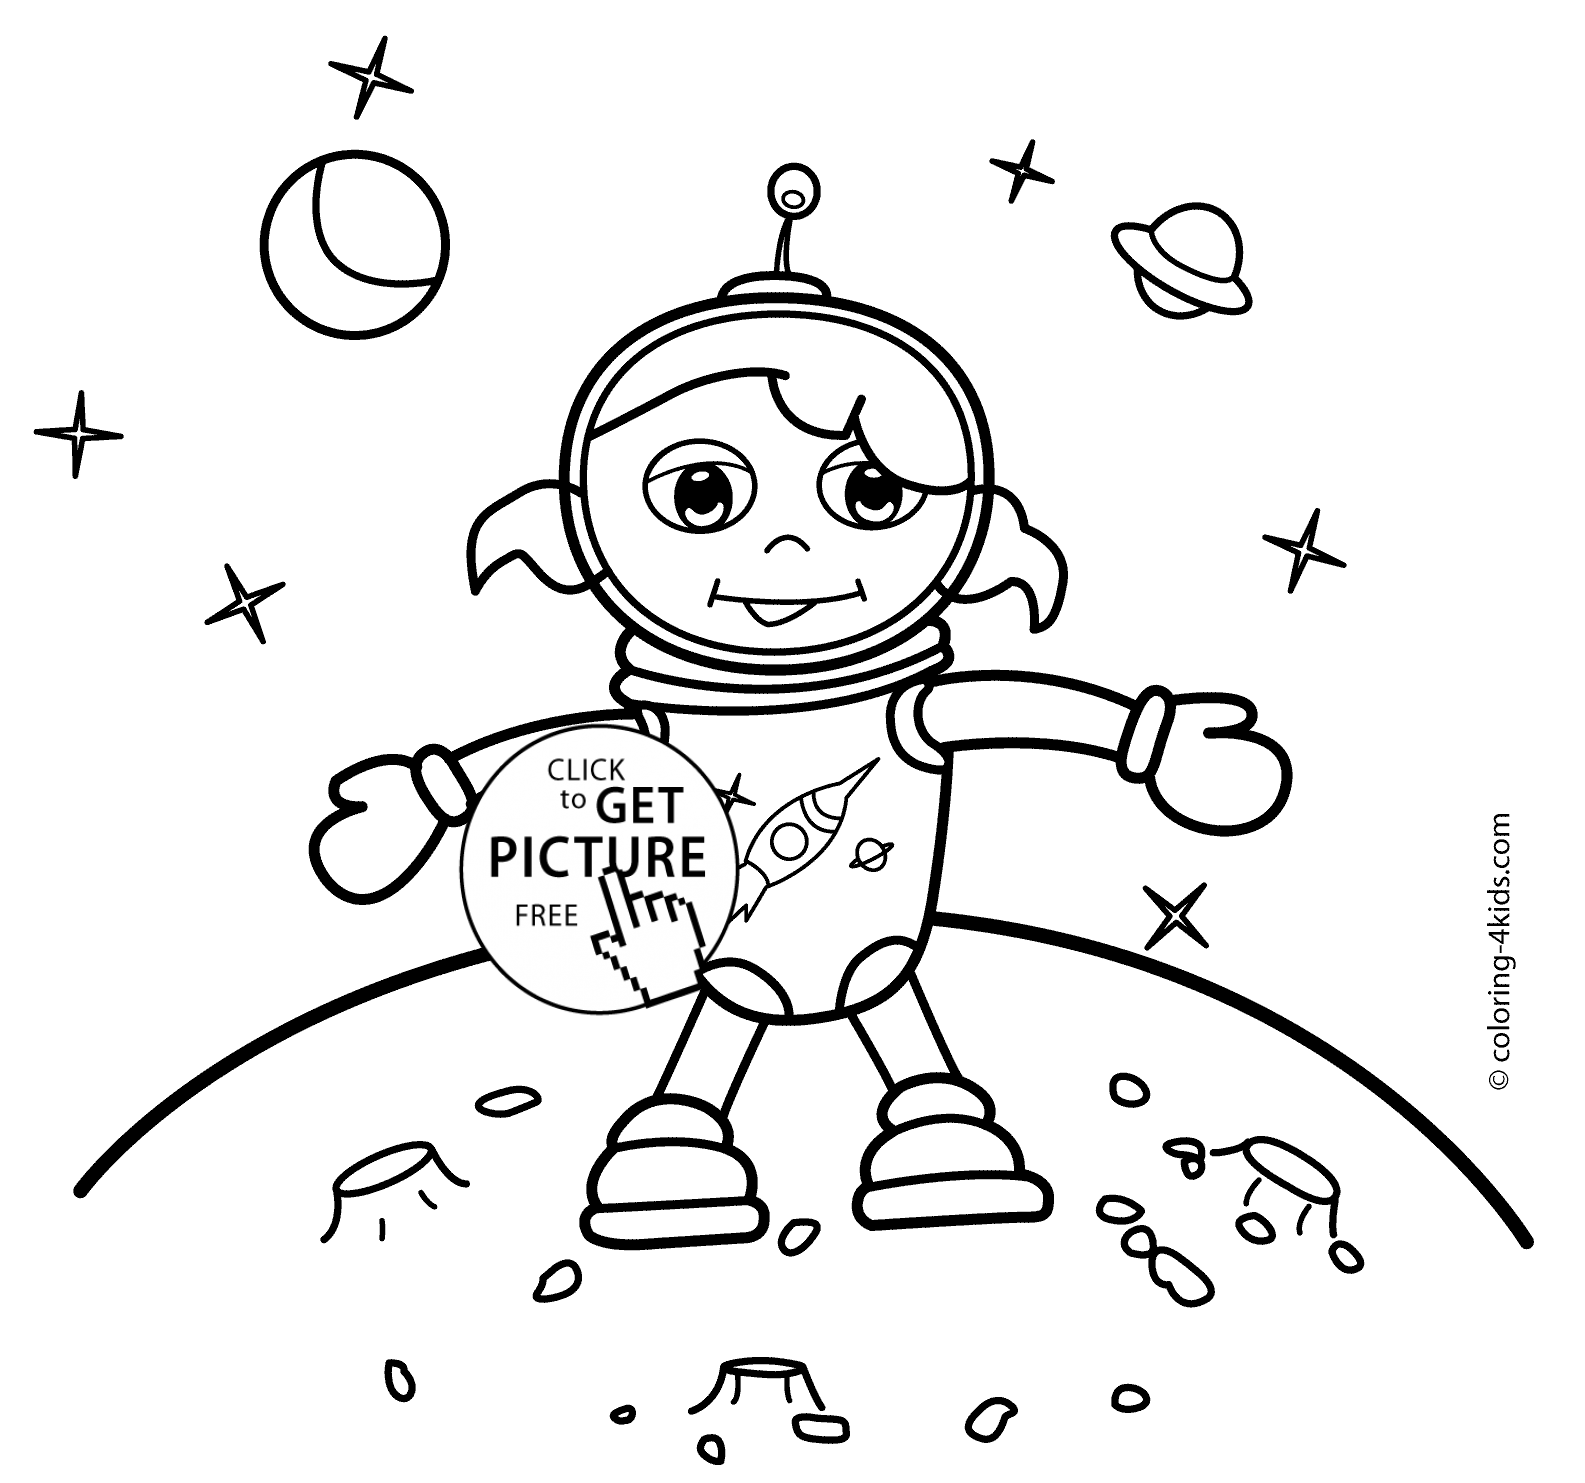 Spaceman girl coloring pages for kids on the moon, printable free ...